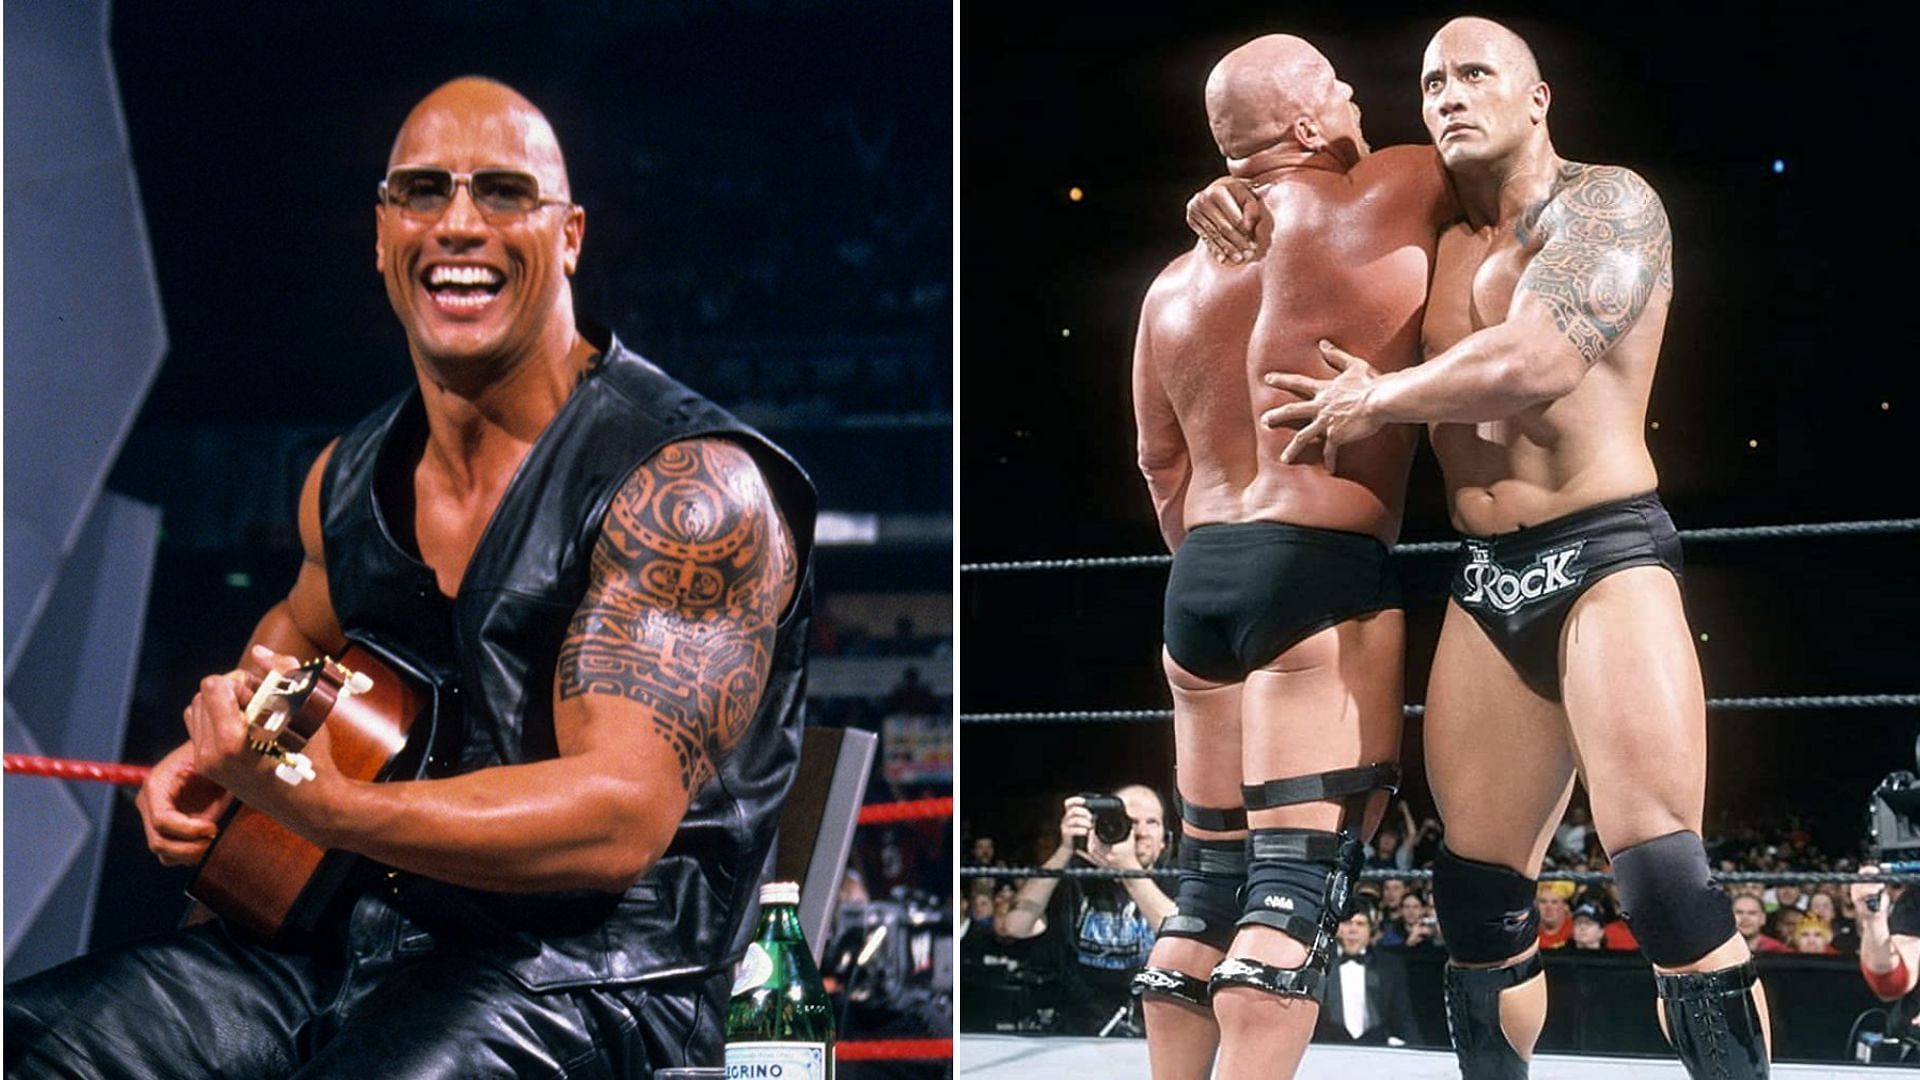 The Rock introduced a new heel character in 2003